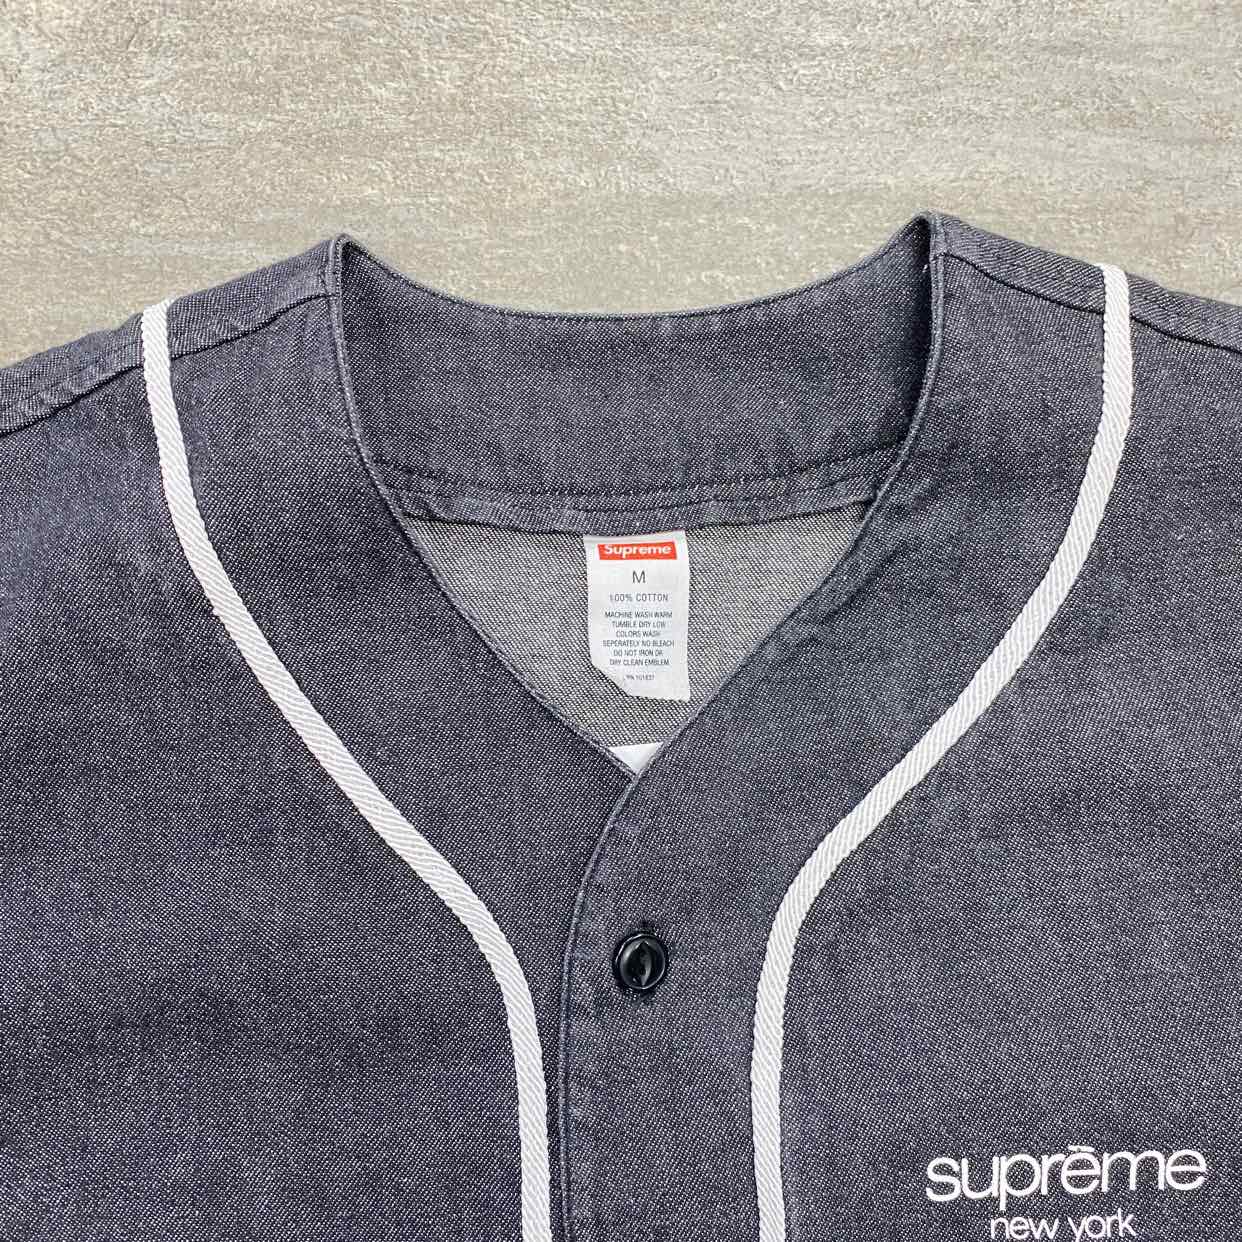 Supreme Jersey Grey &quot;CLASSIC LOGO&quot; Used Size M